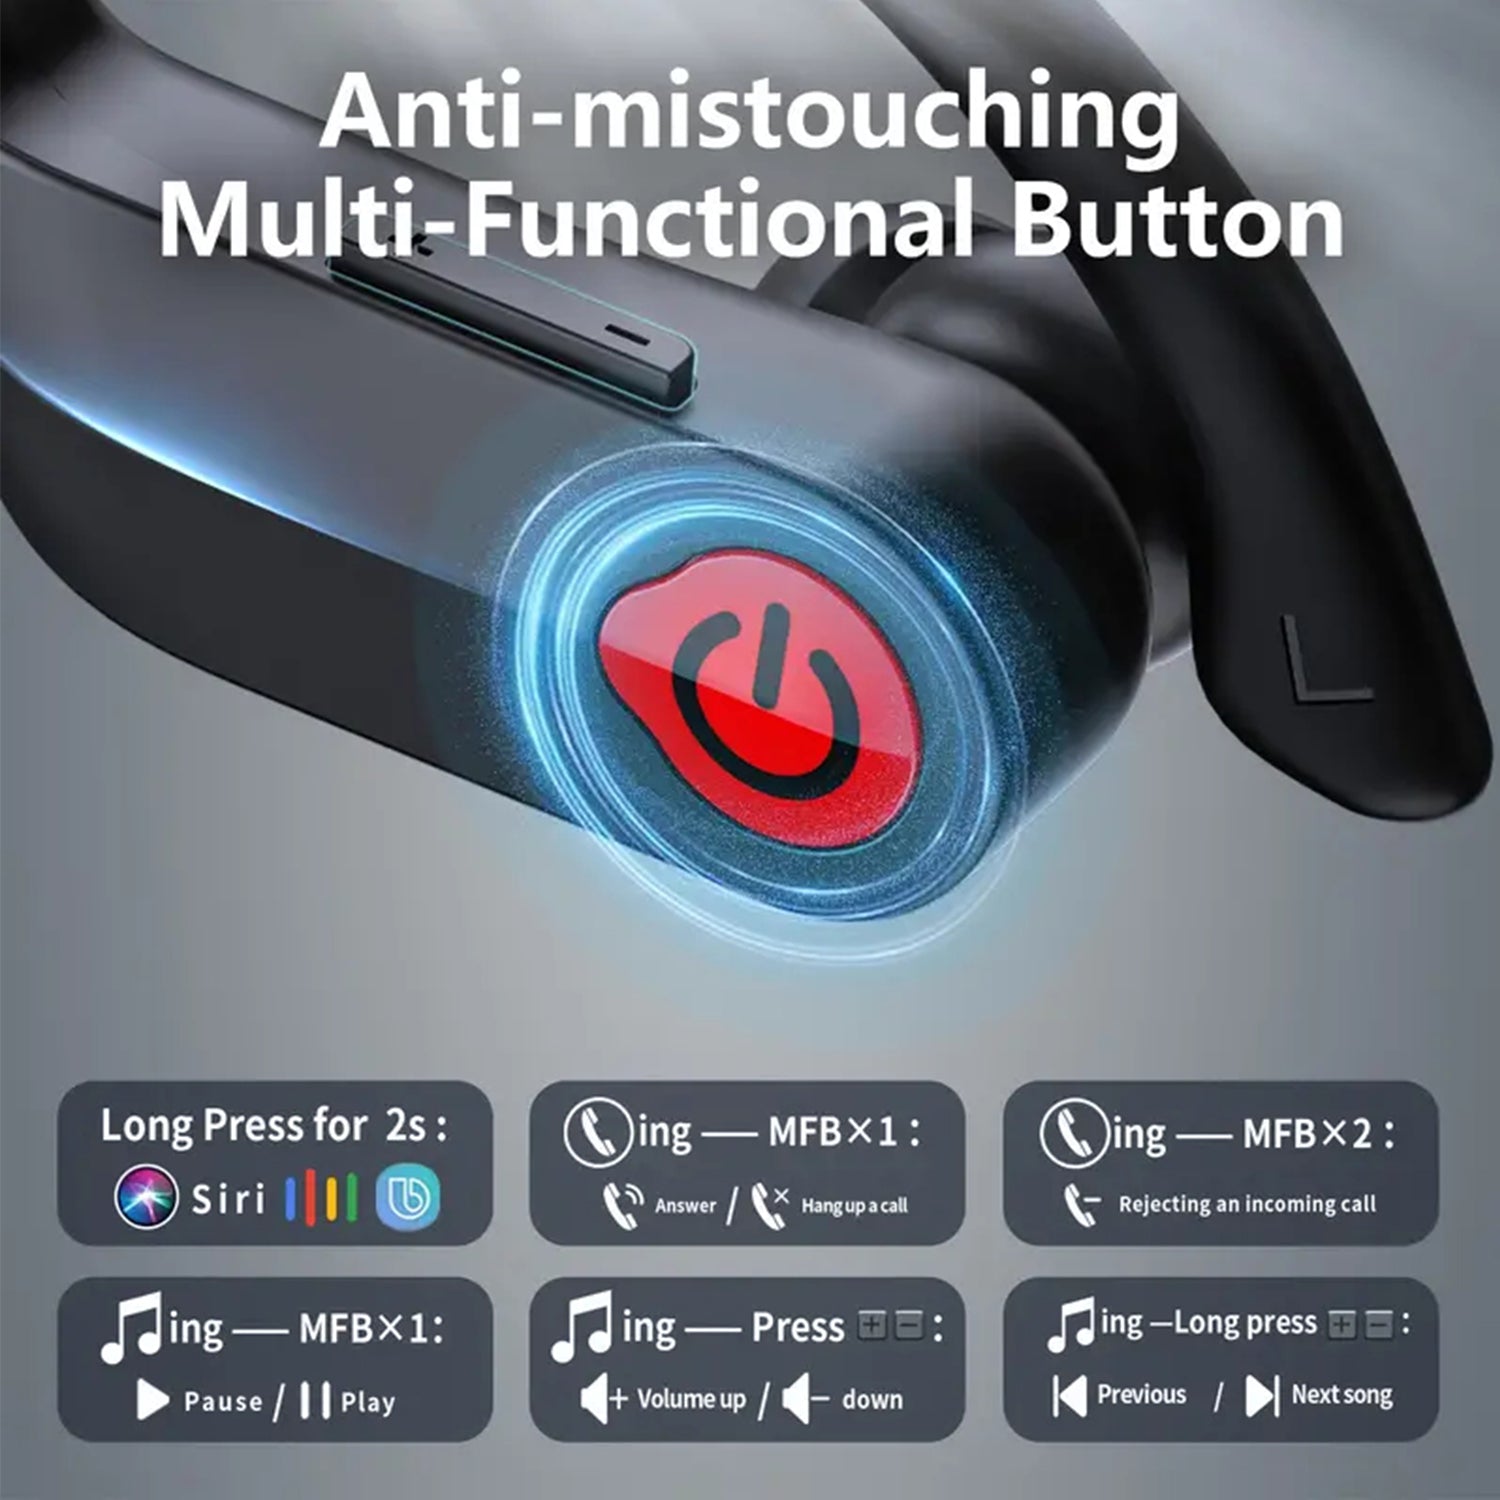 Long range wireless Bluetooth headset with Charged quantity display-Black